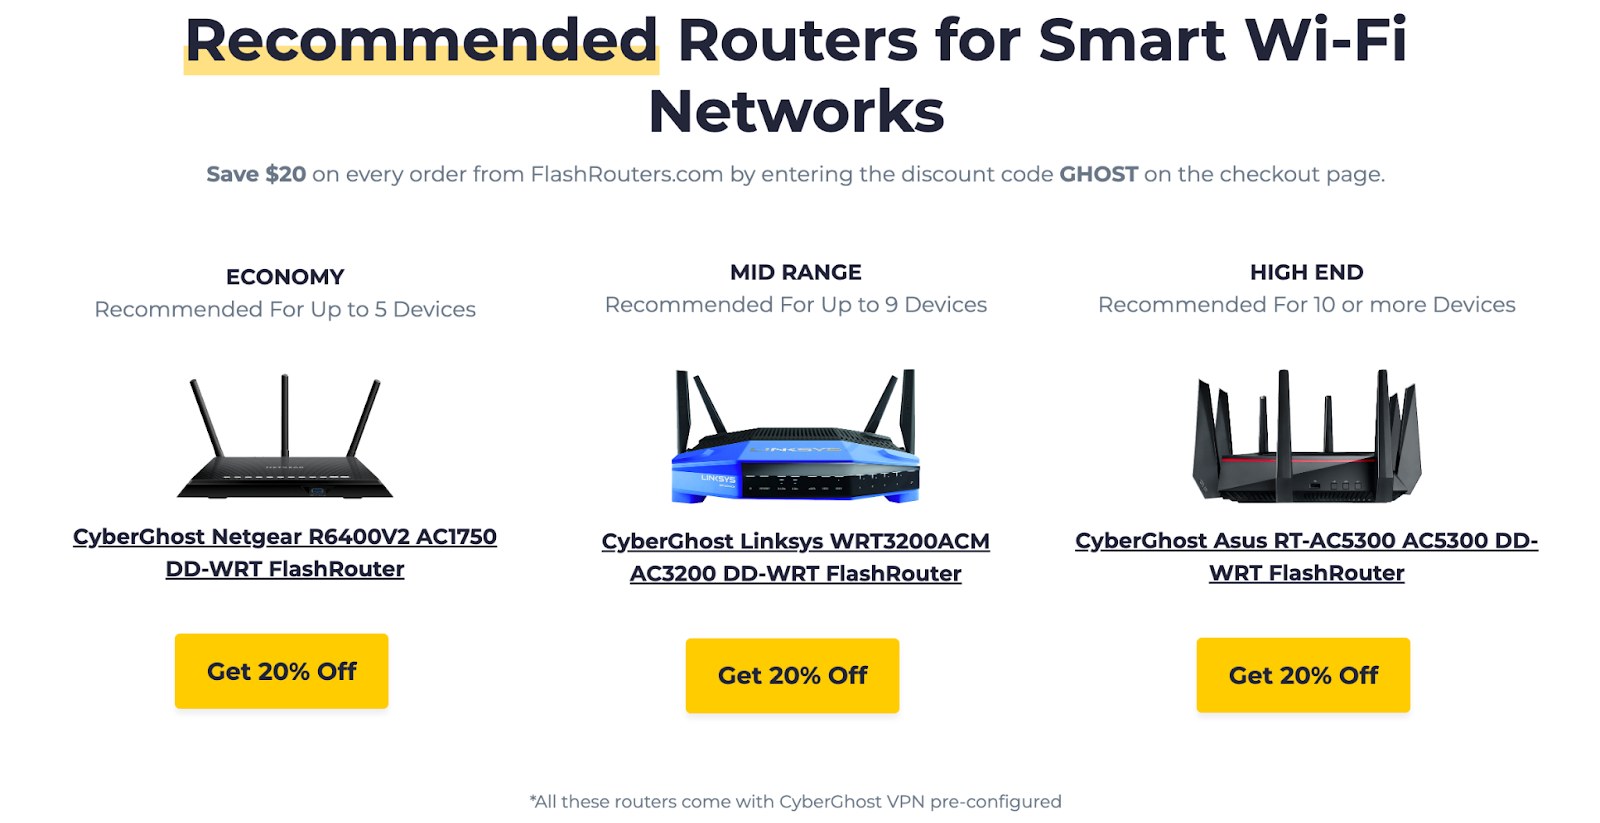 CyberGhost VPN's recommended routers for Smart Wi-Fi networks